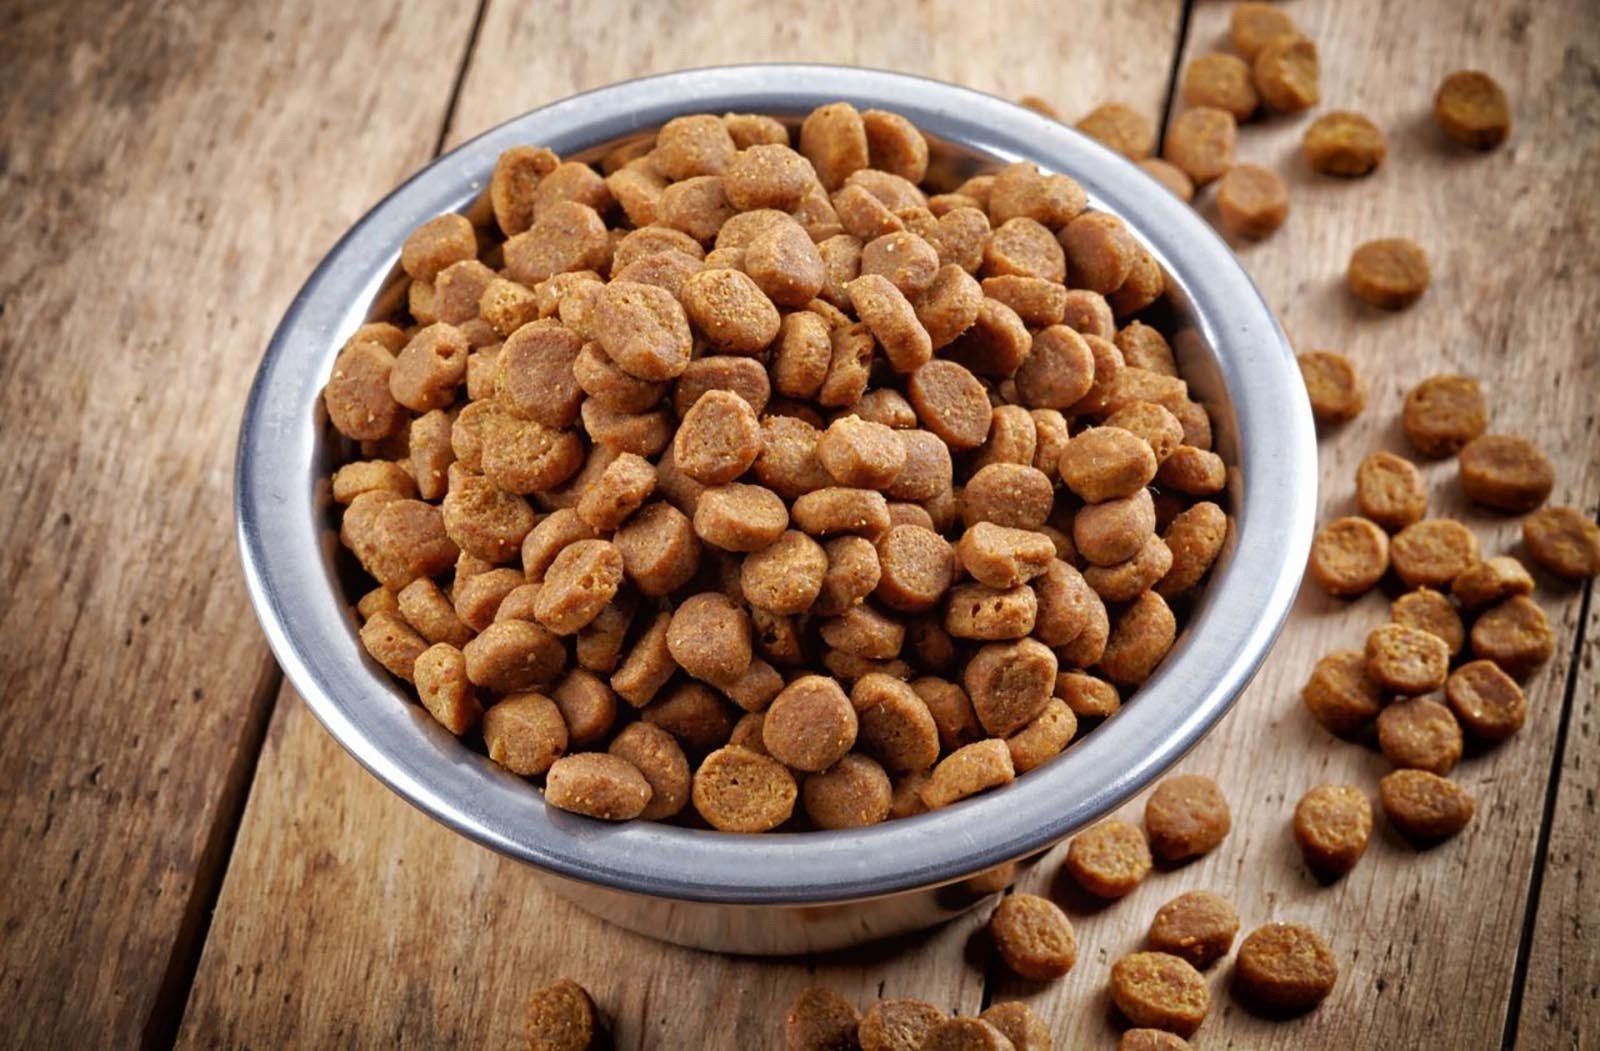 What Is Ash In Pet Food?